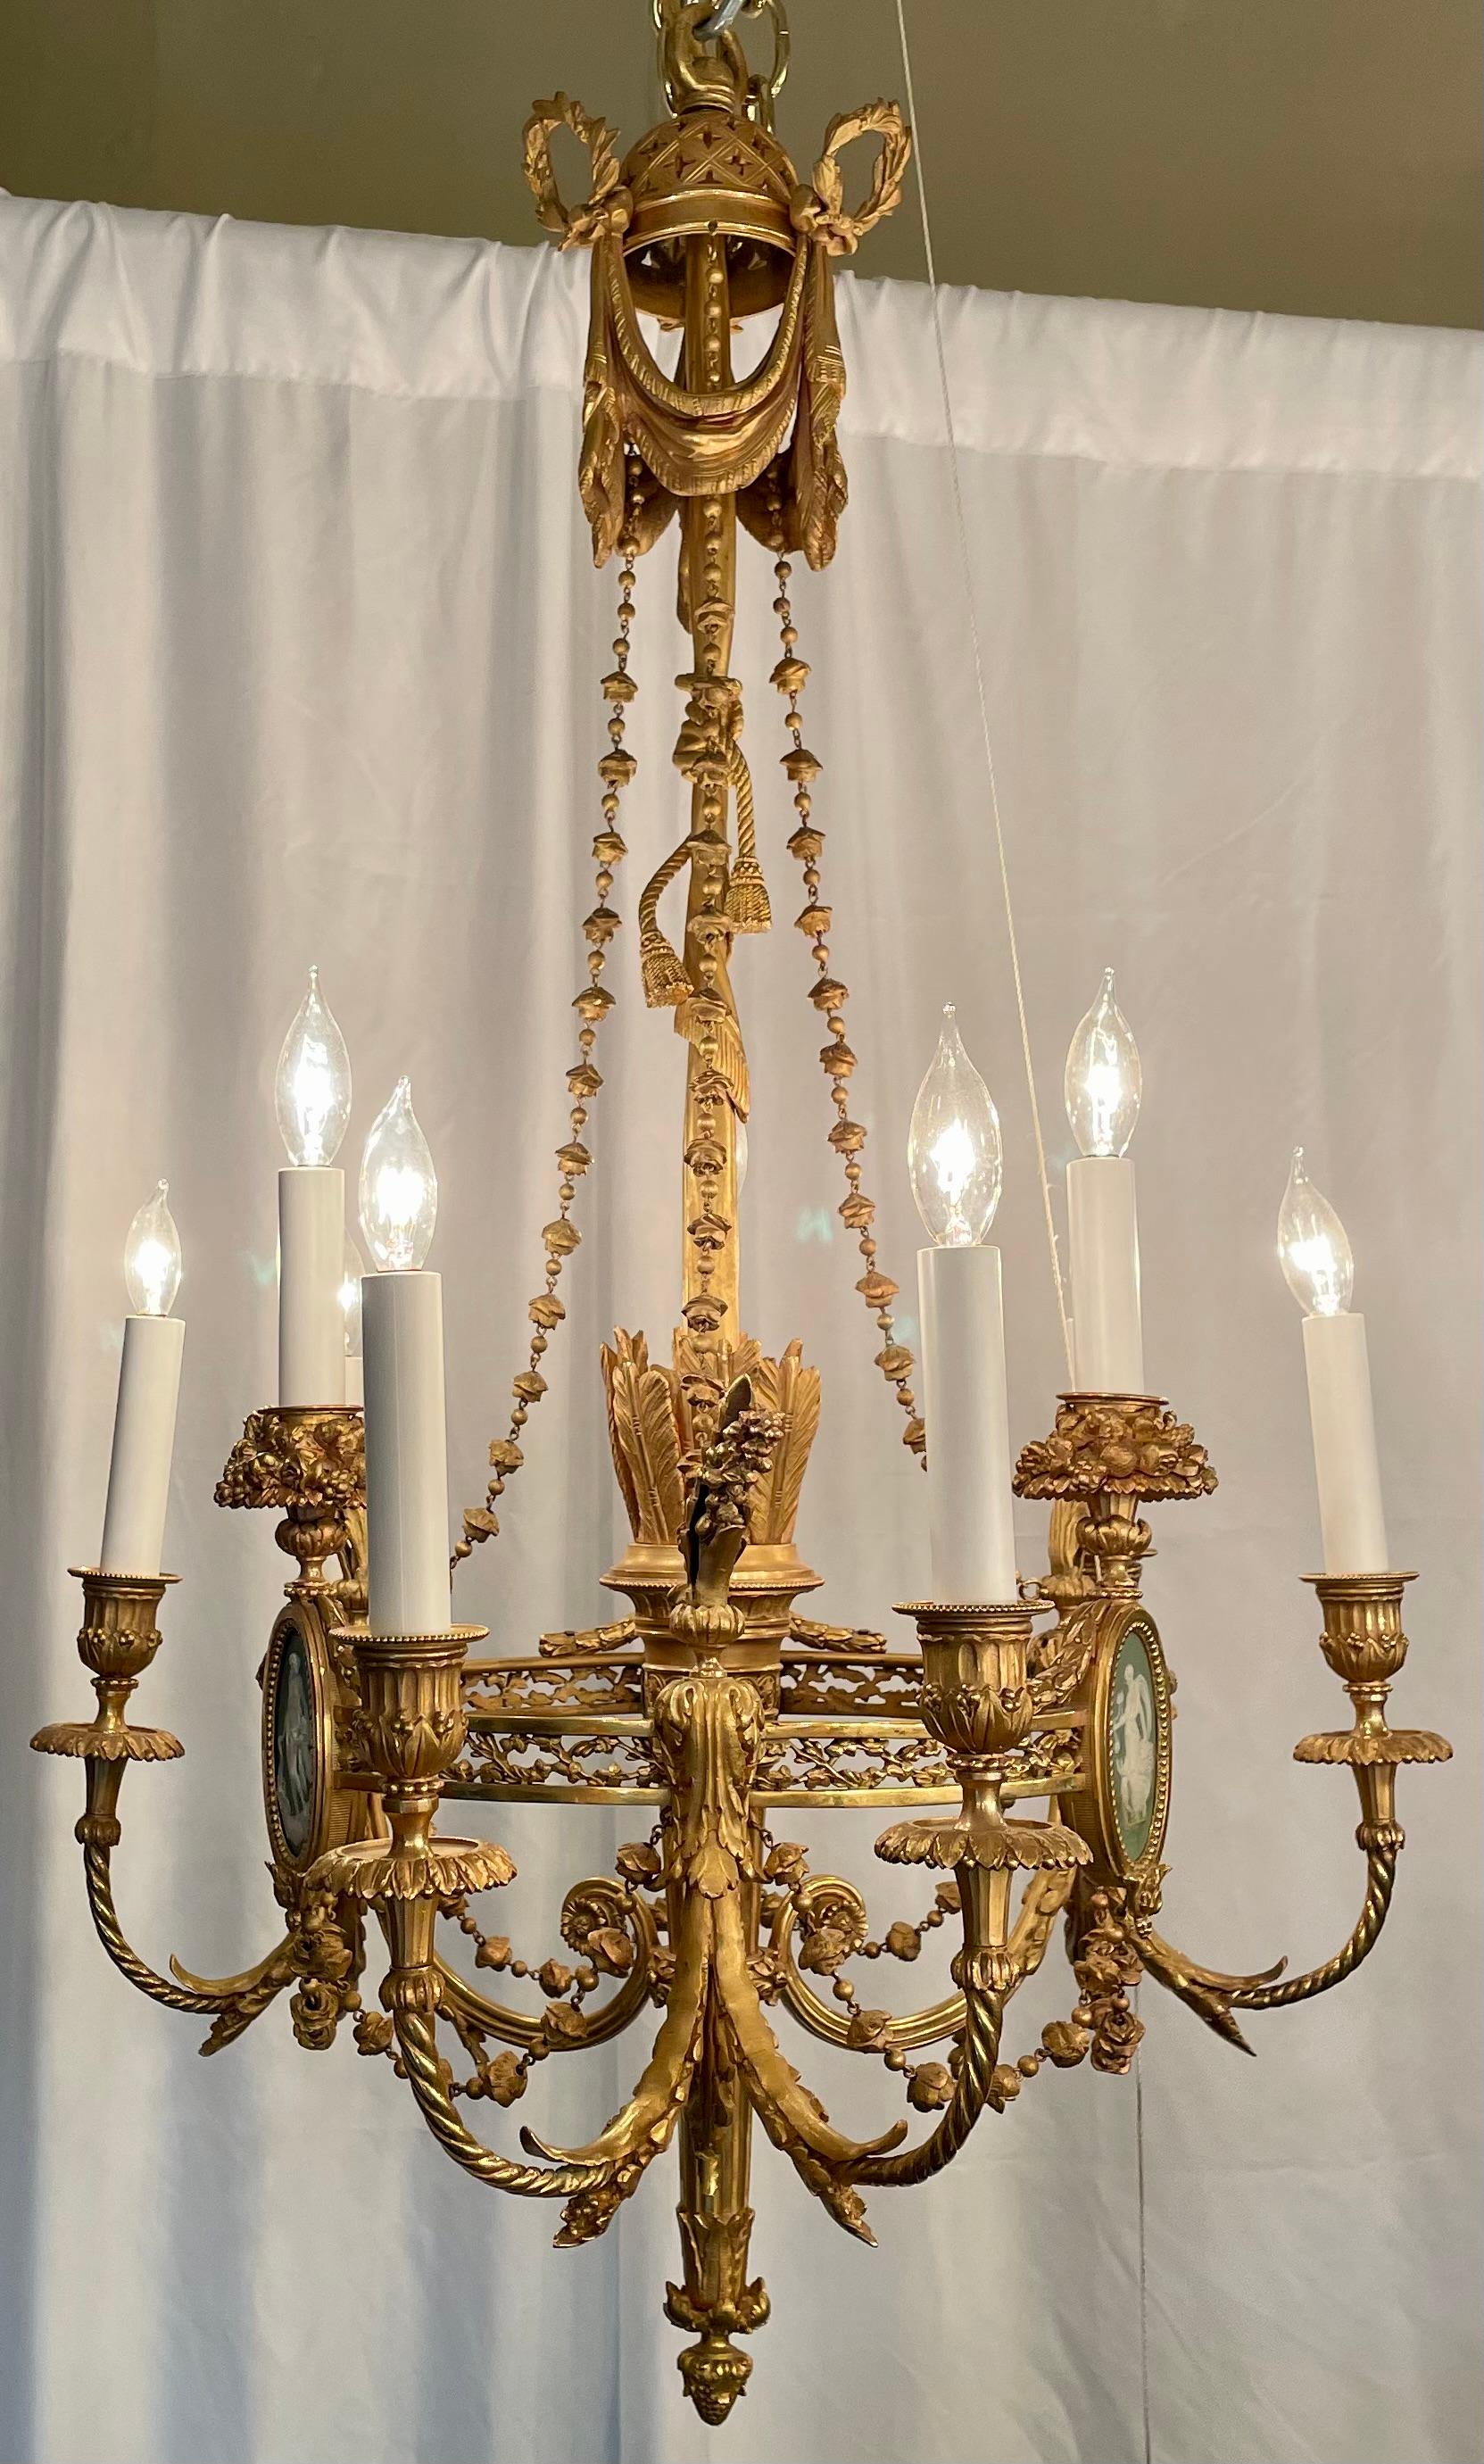 Finest quality antique French Louis XVI style gold bronze chandelier with Wedgwood porcelain mounts, circa 1880.